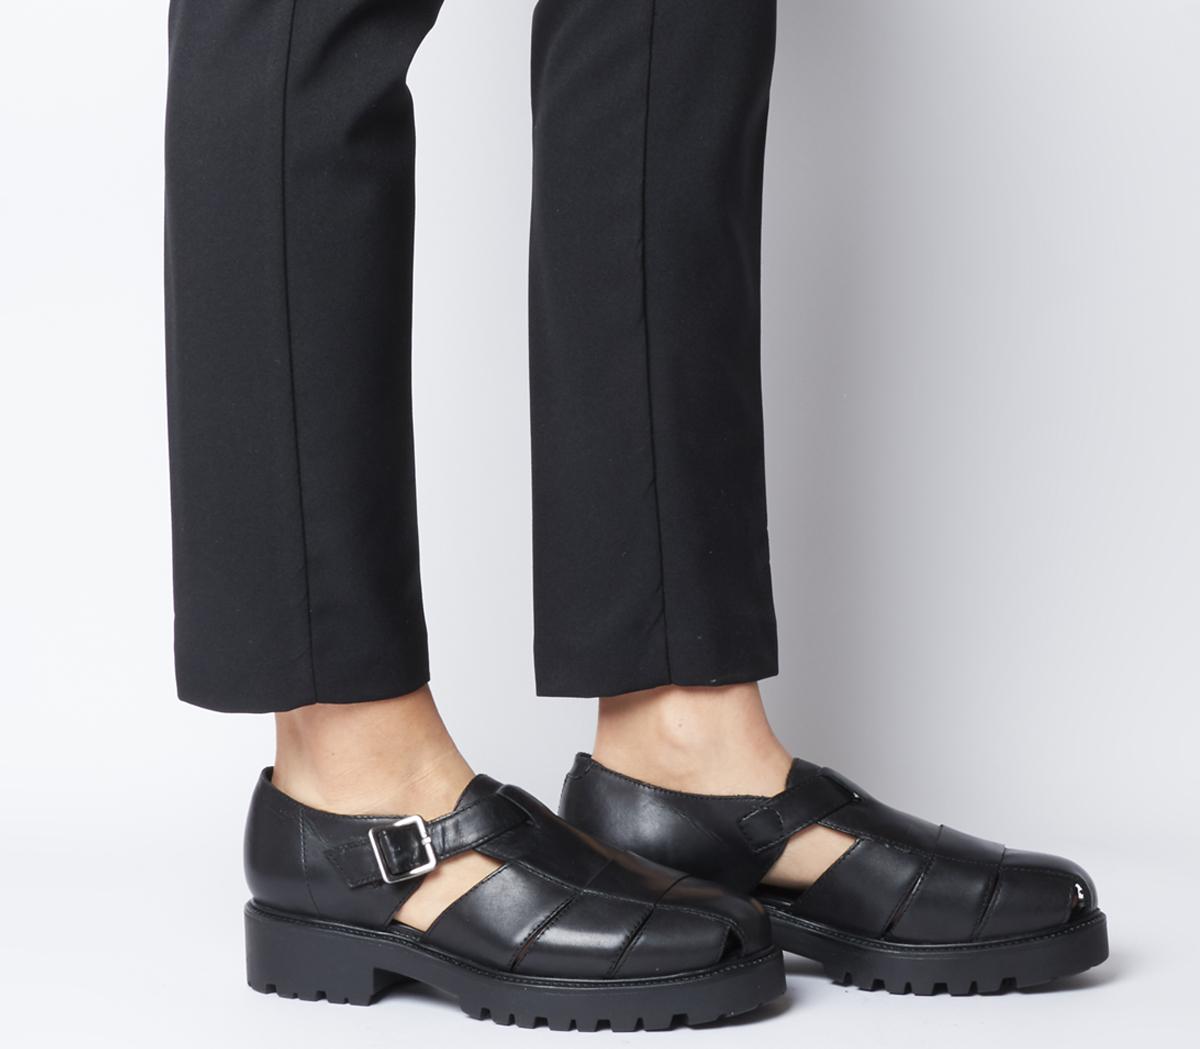 black flats with buckle